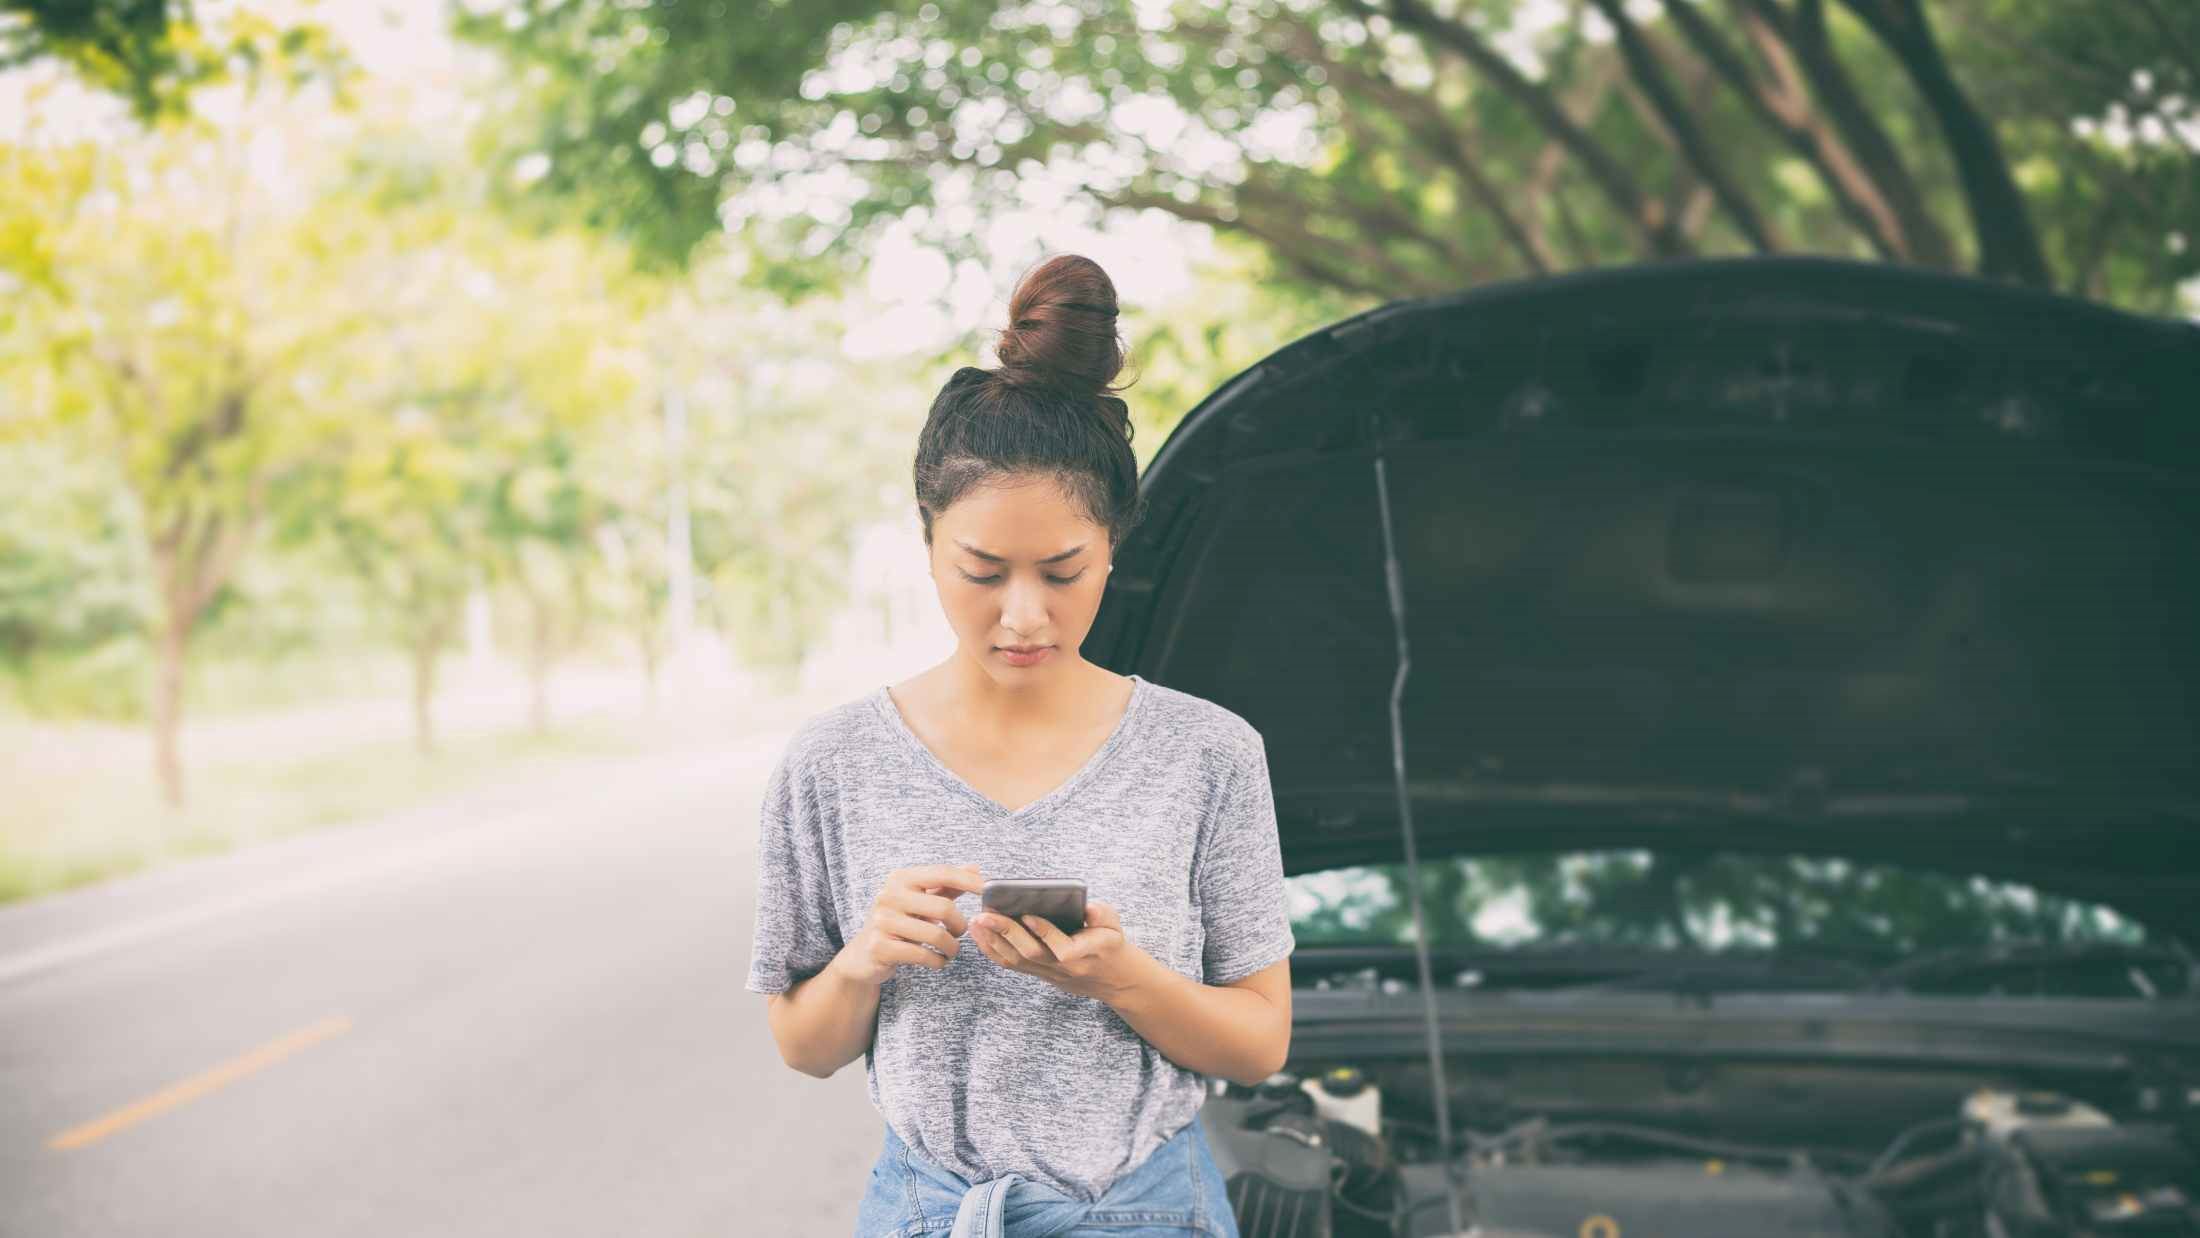 Young woman using mobile phone next to her breakdown car on the road